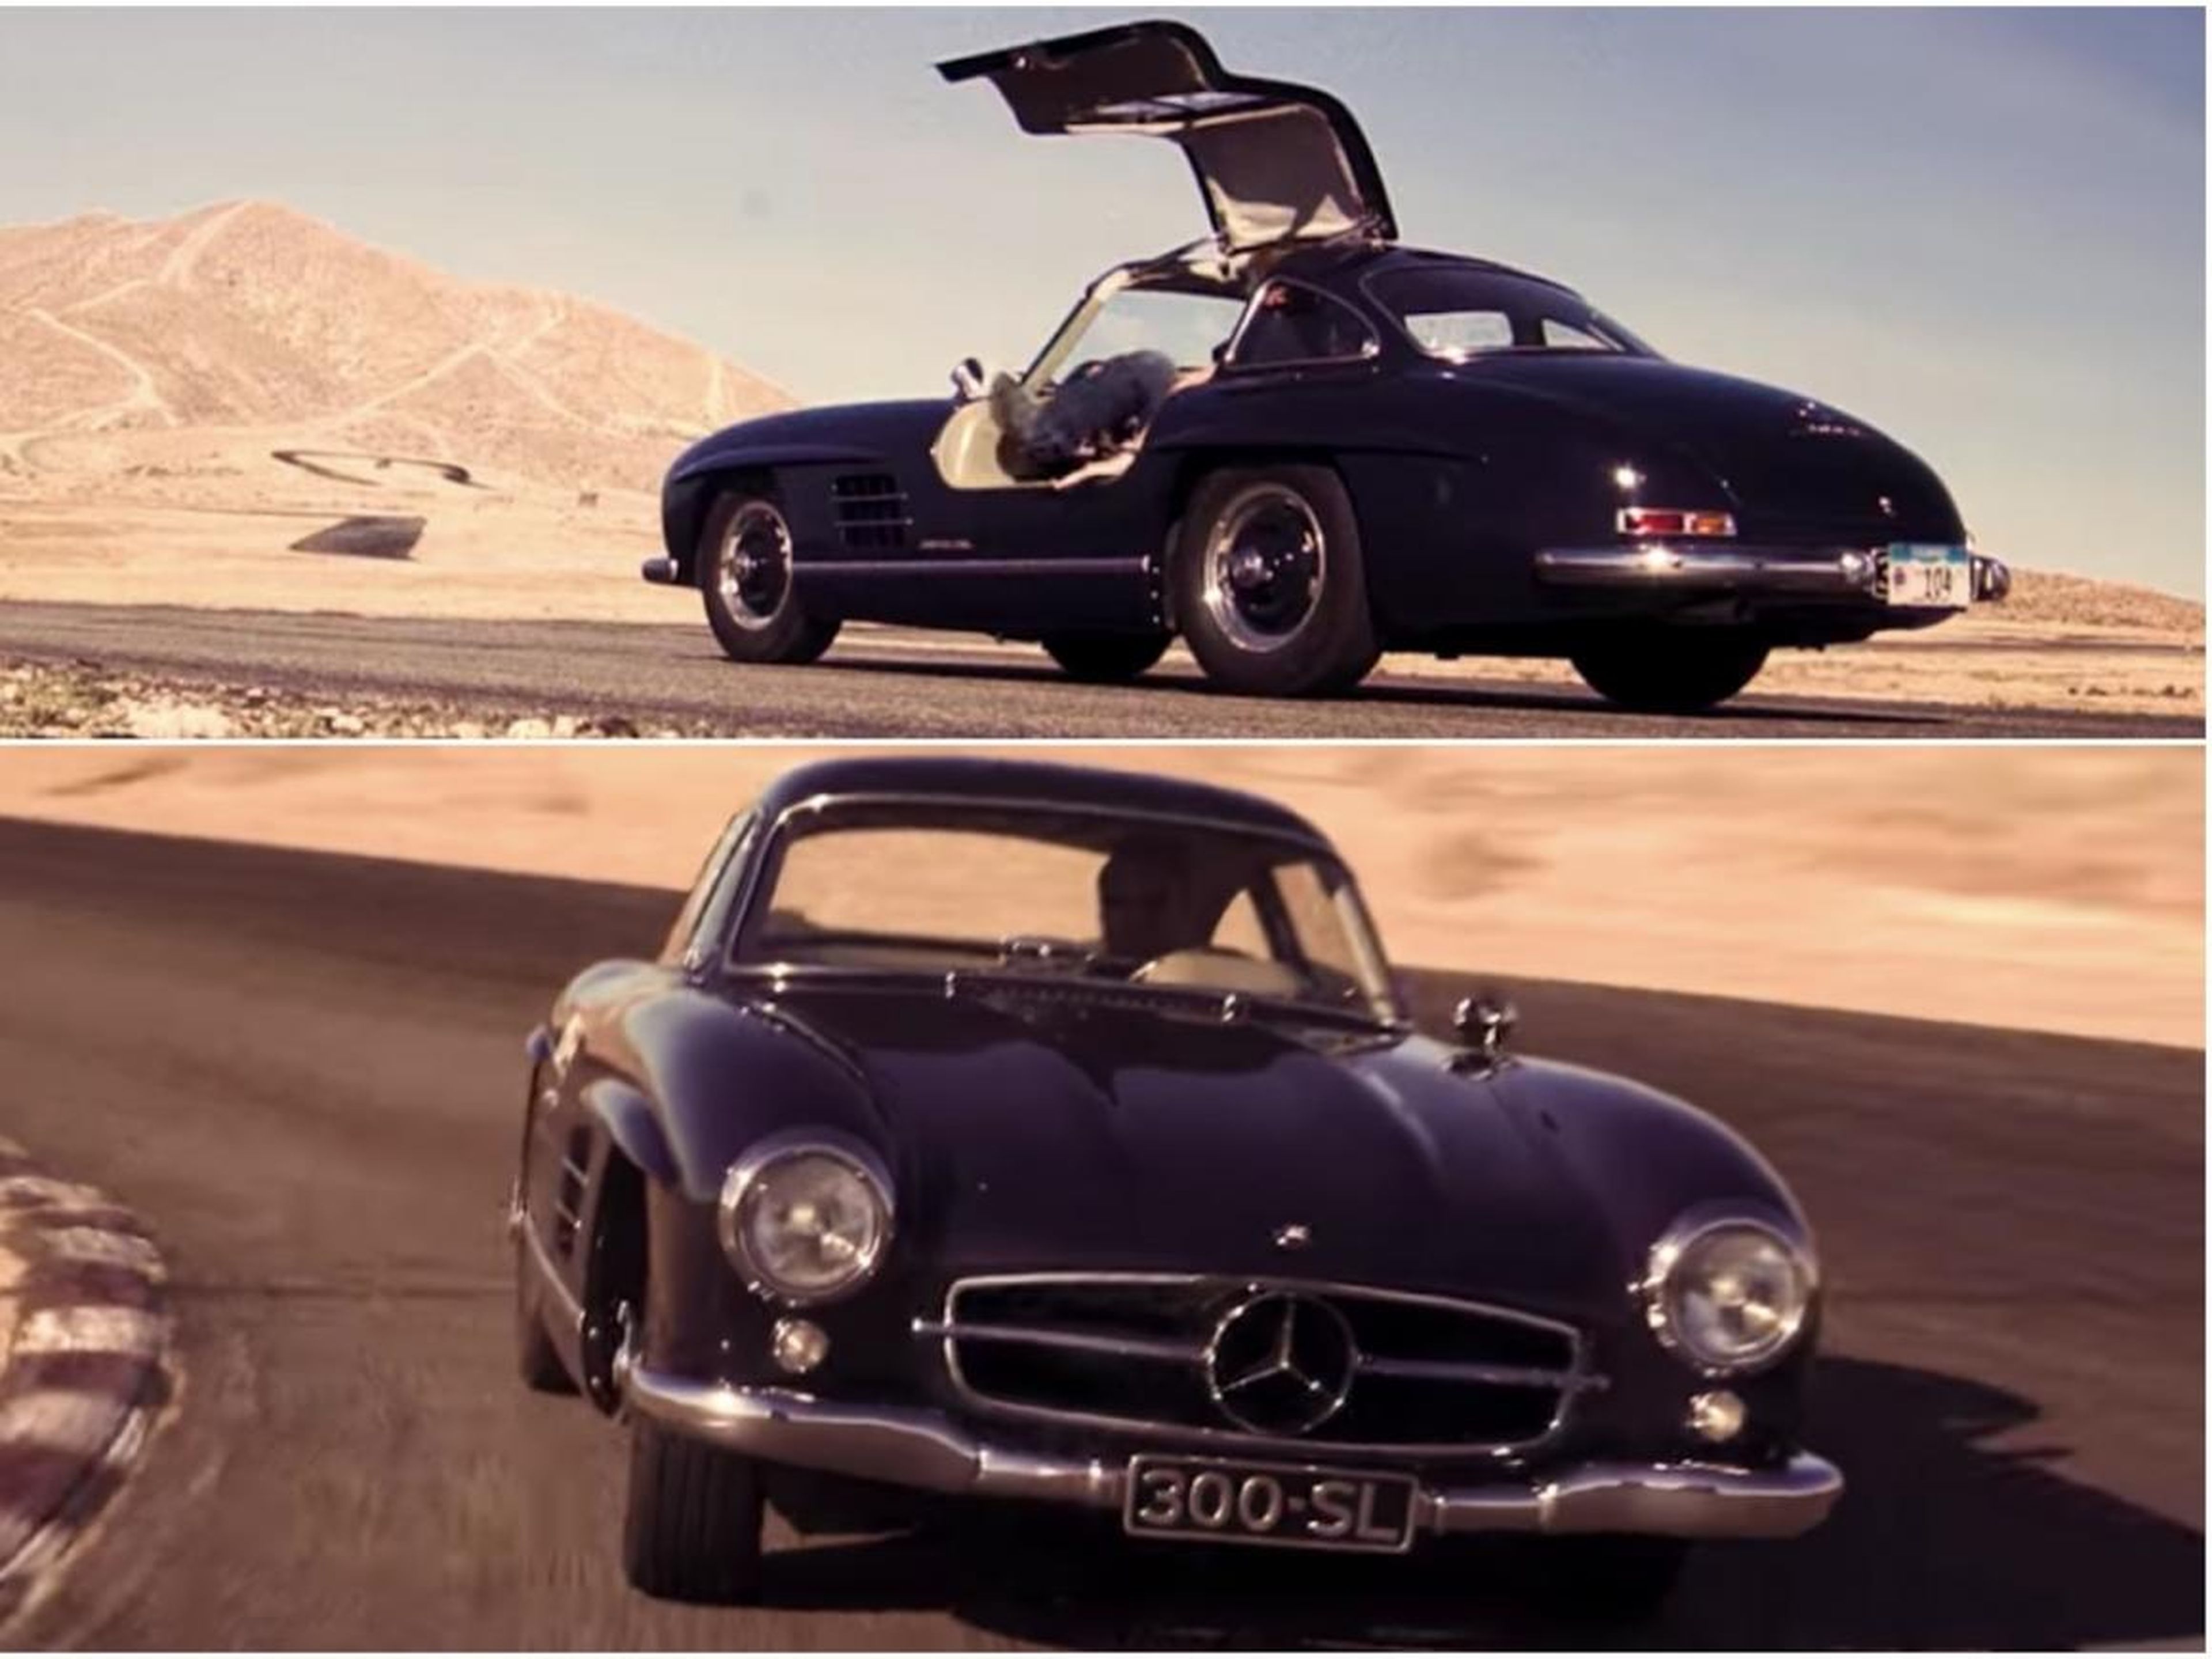 In a 2017 interview with Formula1.com, Hamilton was asked which car he'd use if he could only ever drive one on the road ever again. "Probably the Mercedes SL 300 Gullwing," he said. Looking at it below, it's not a bad choice —